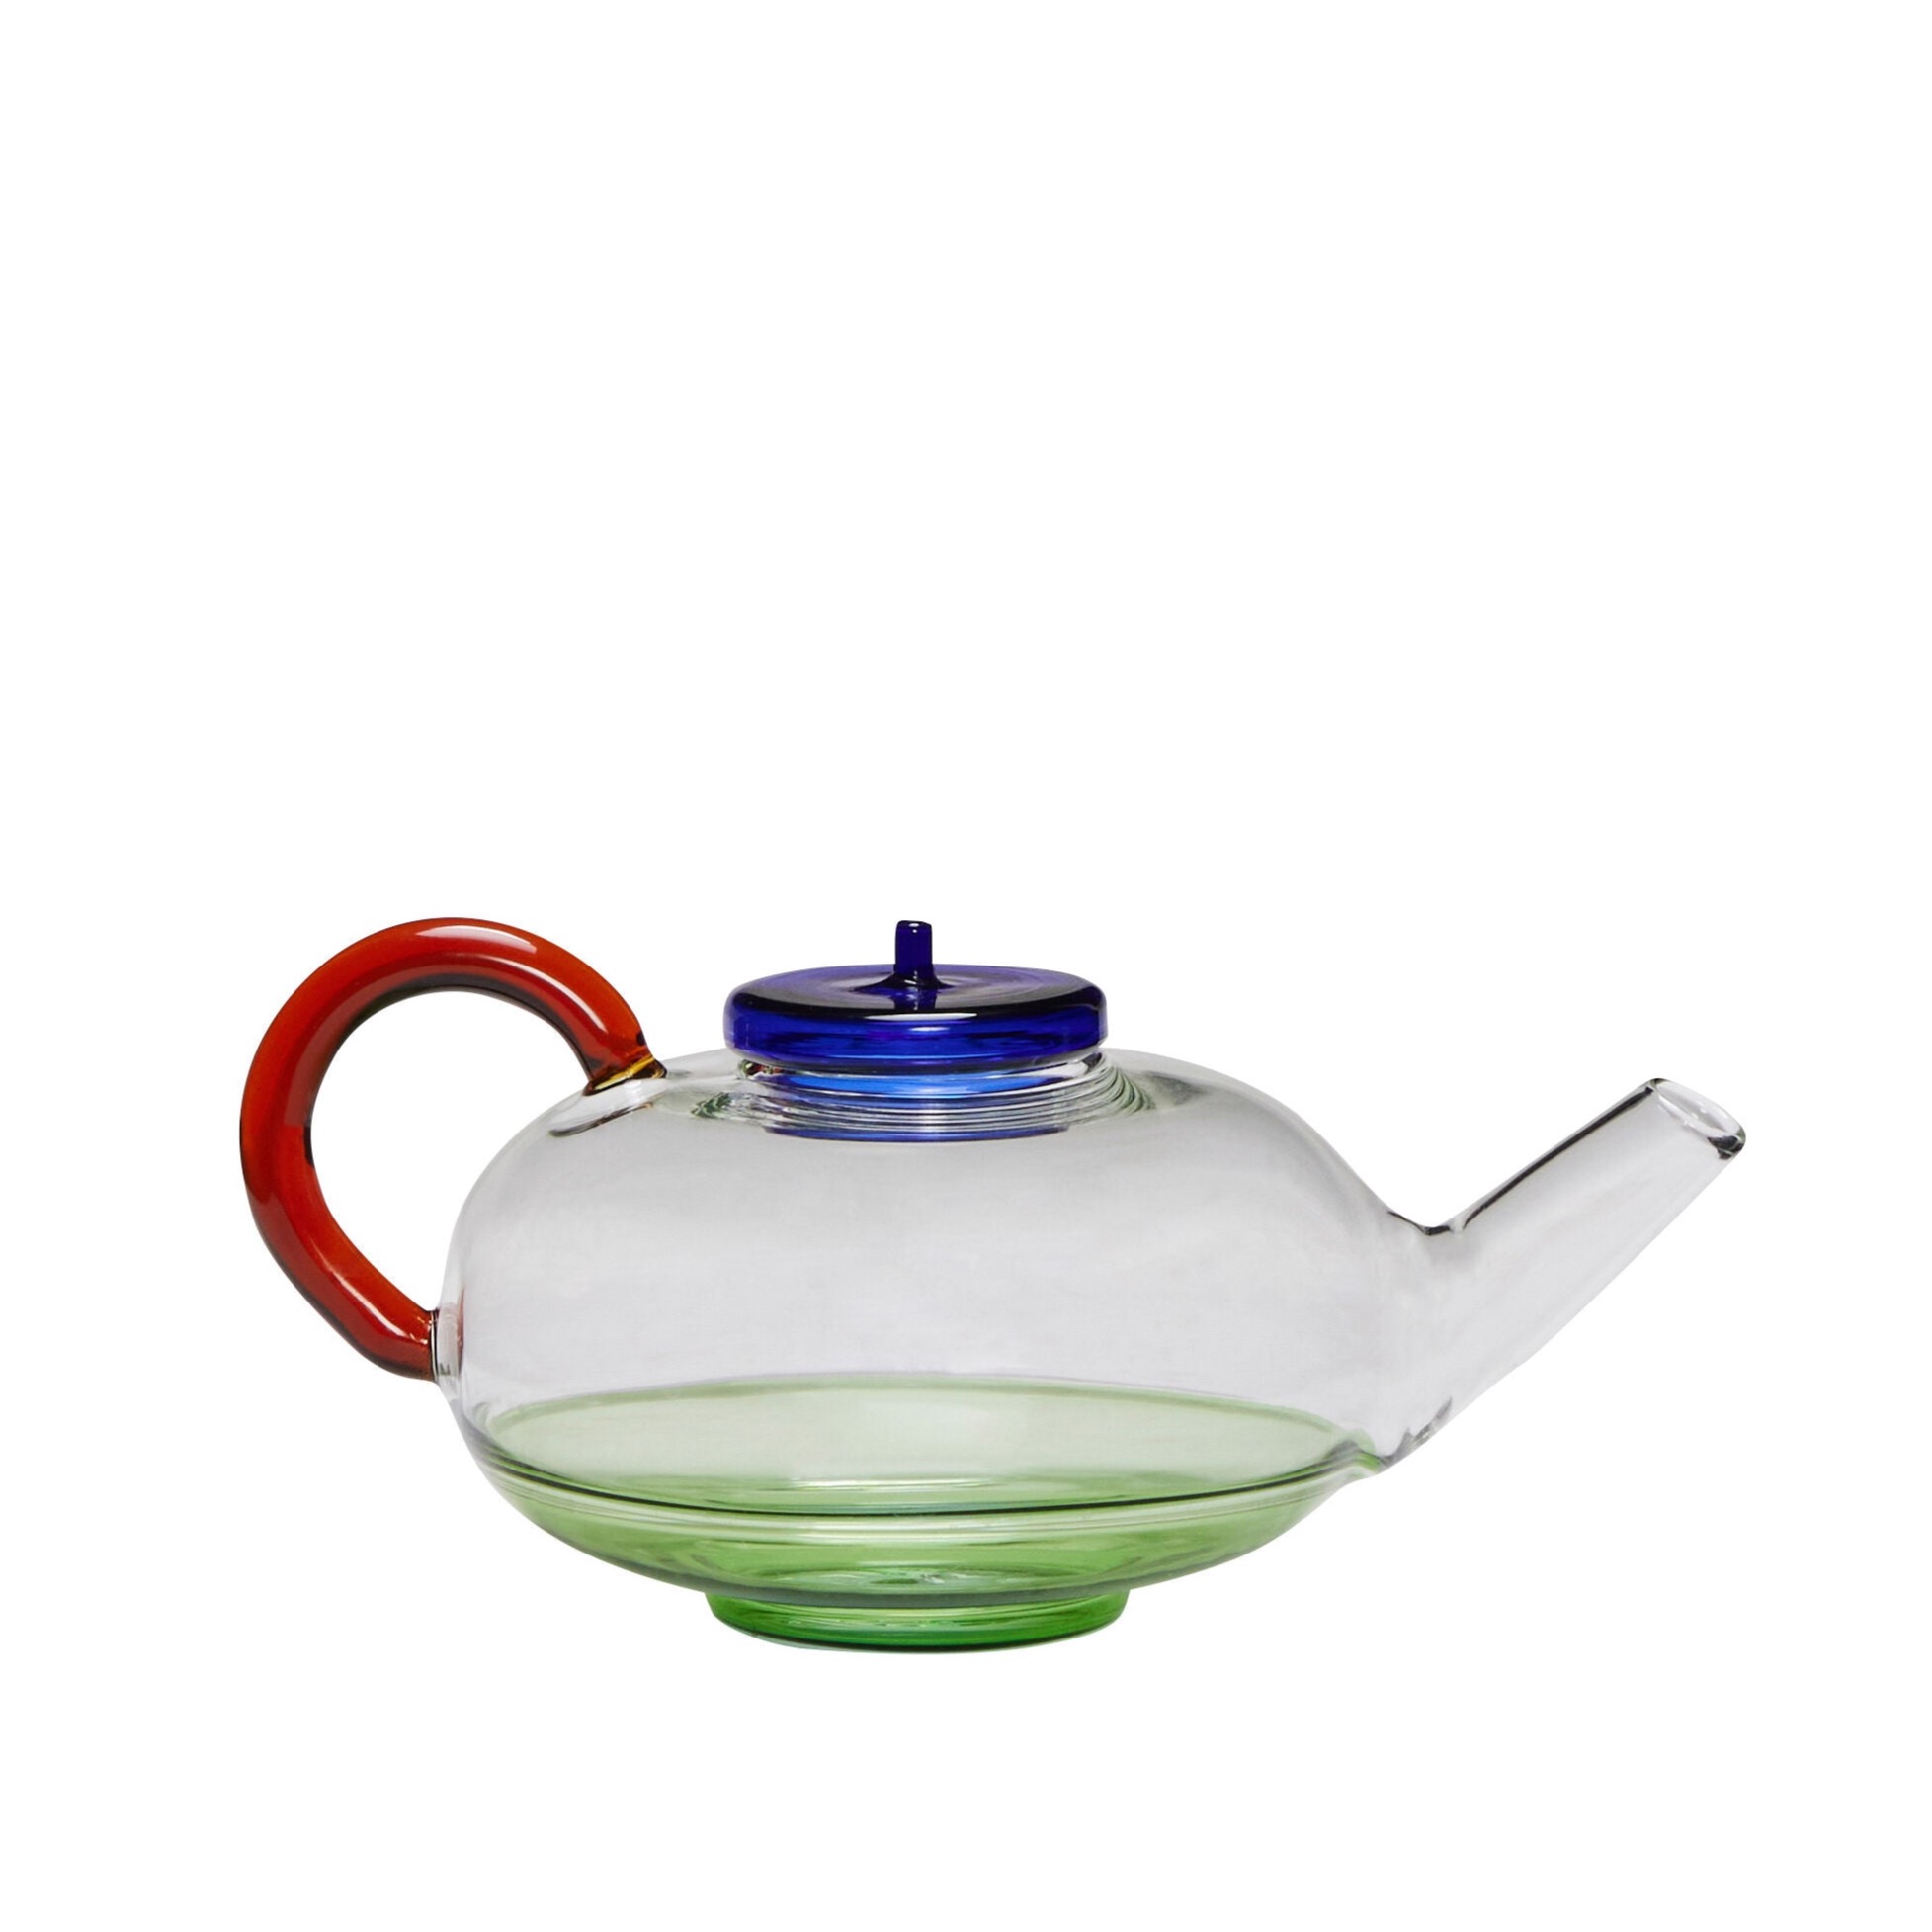 Hubsch NoRush Teapot in Blue, Clear and Green